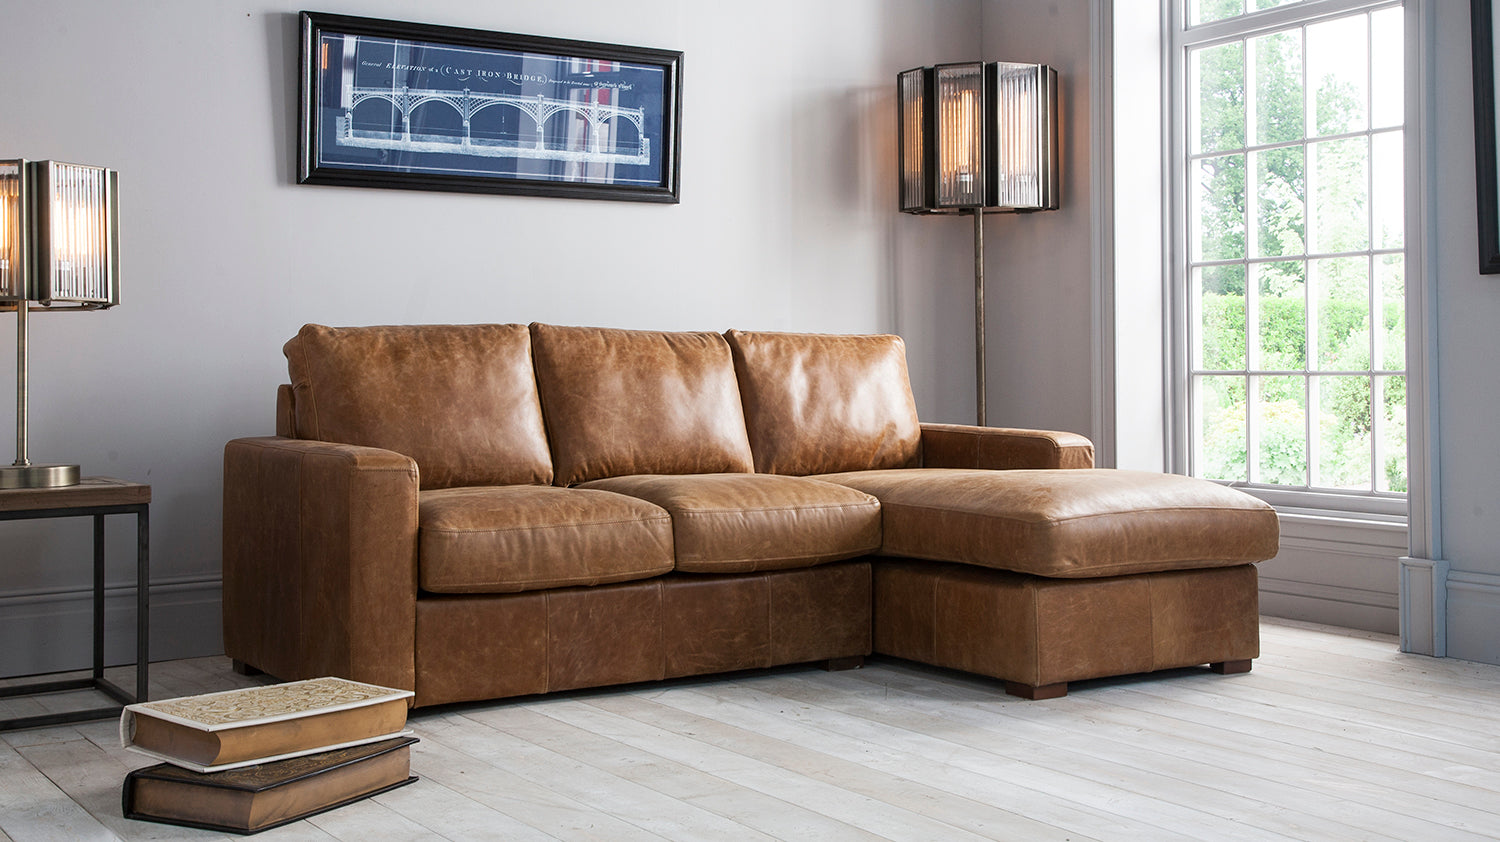 Maximus  leather sofa from Top Secret Furniture, Holmes Chapel